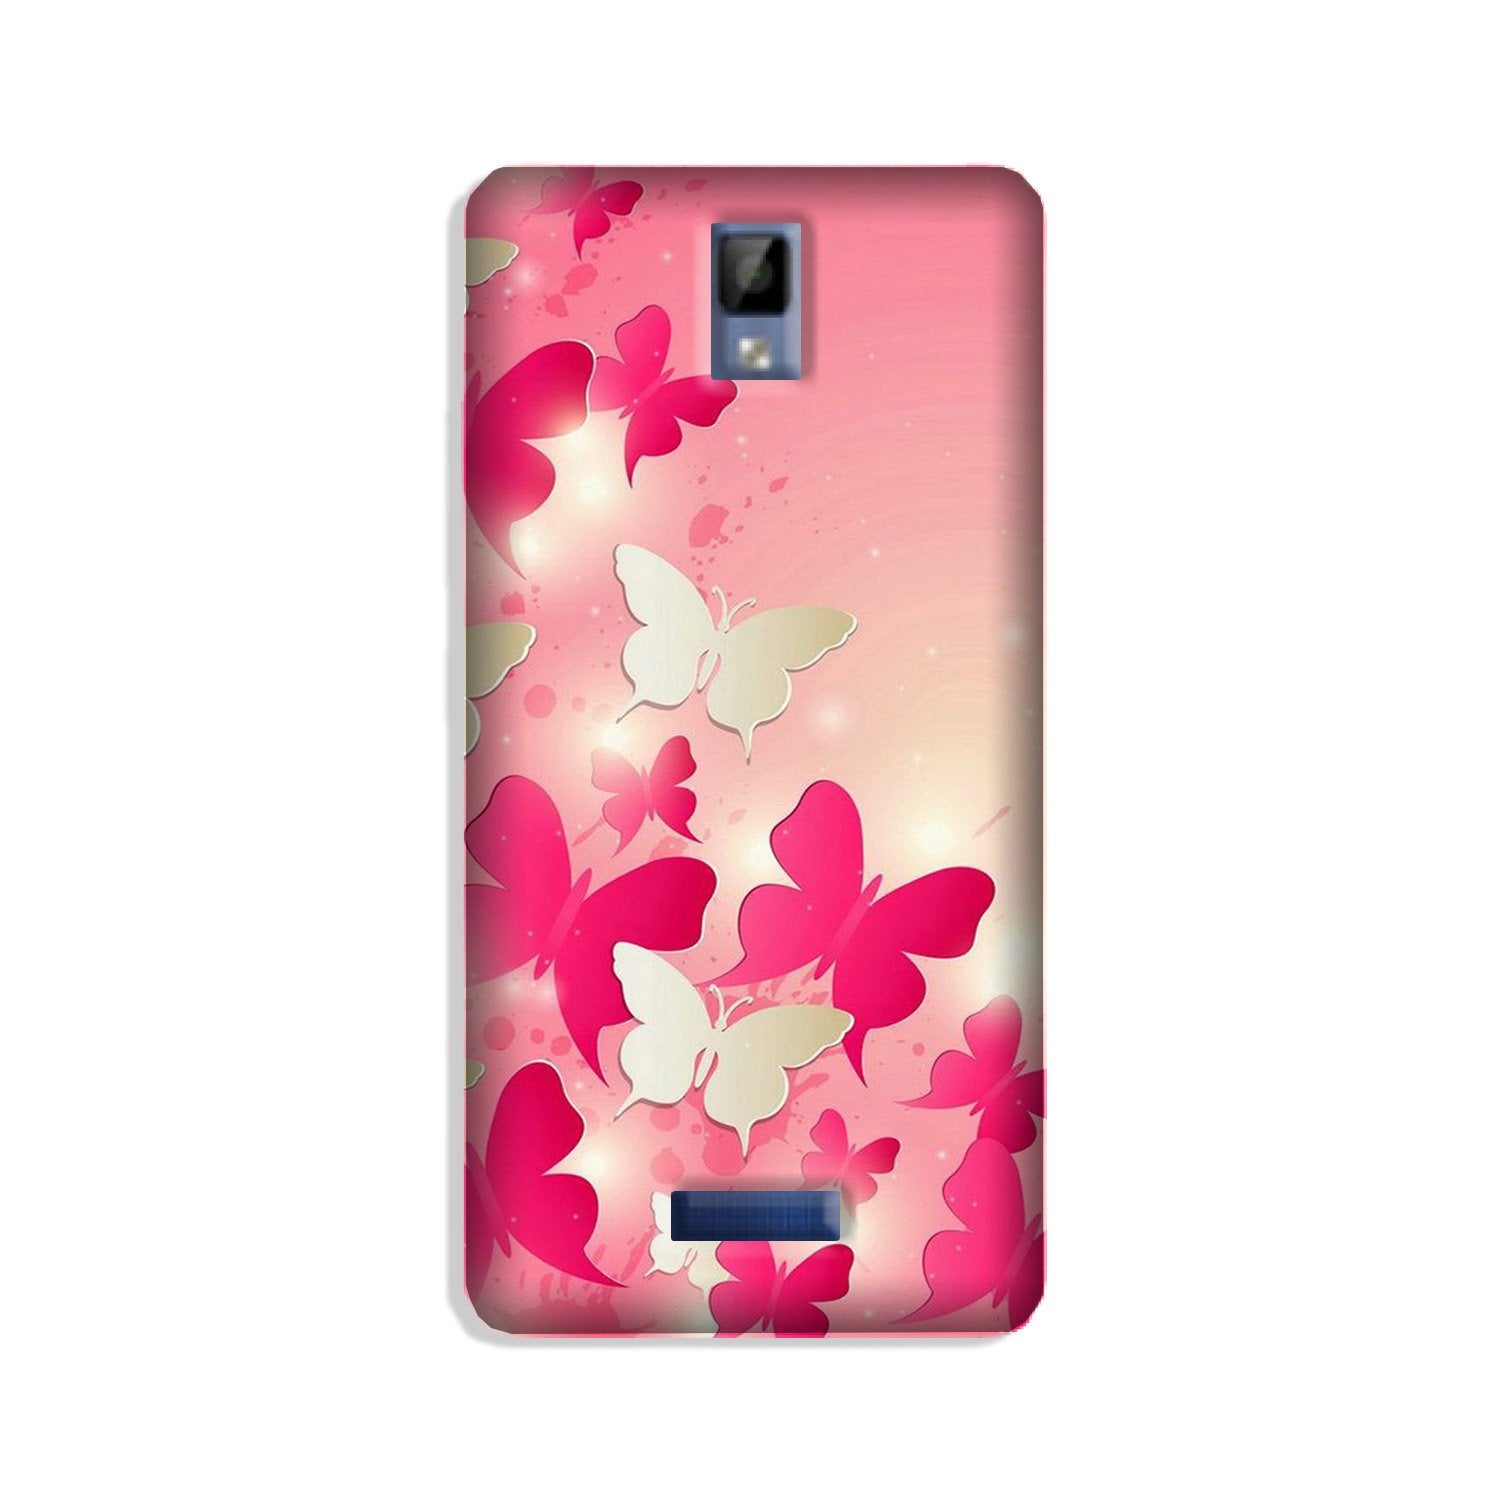 White Pick Butterflies Case for Gionee P7